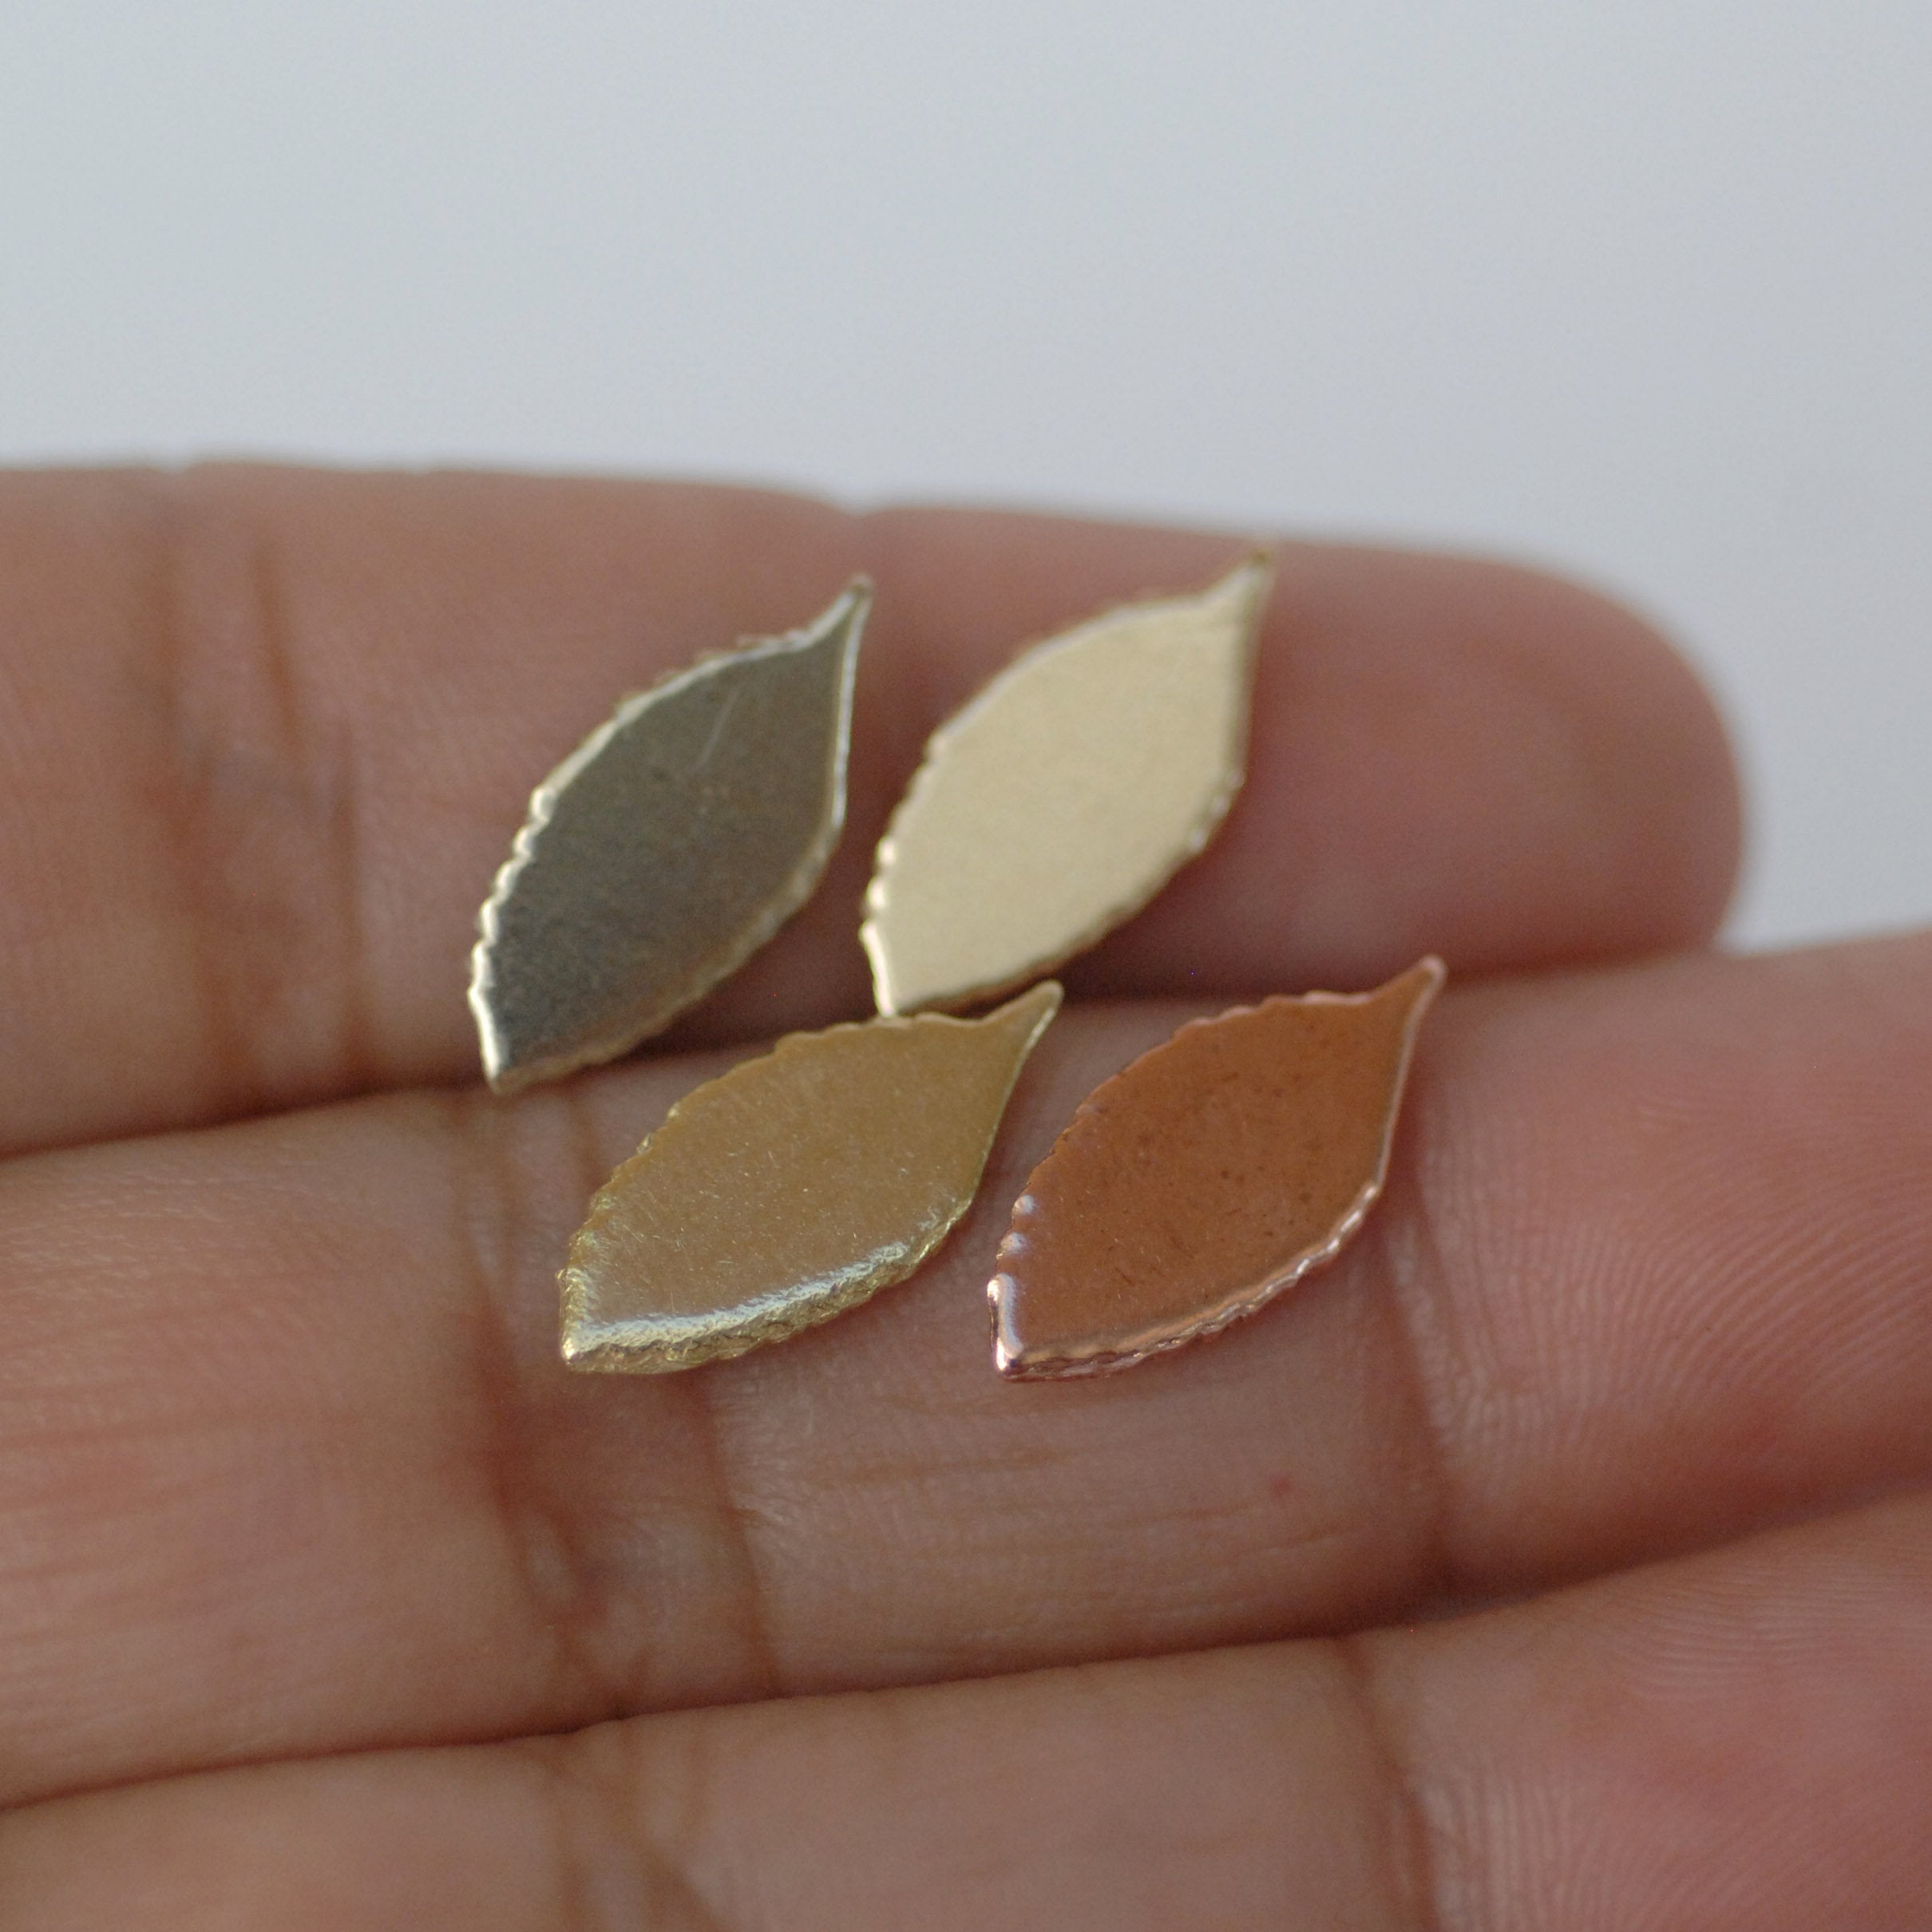 Tiny Leaf shapes - Leaves blank shape for making jewelry